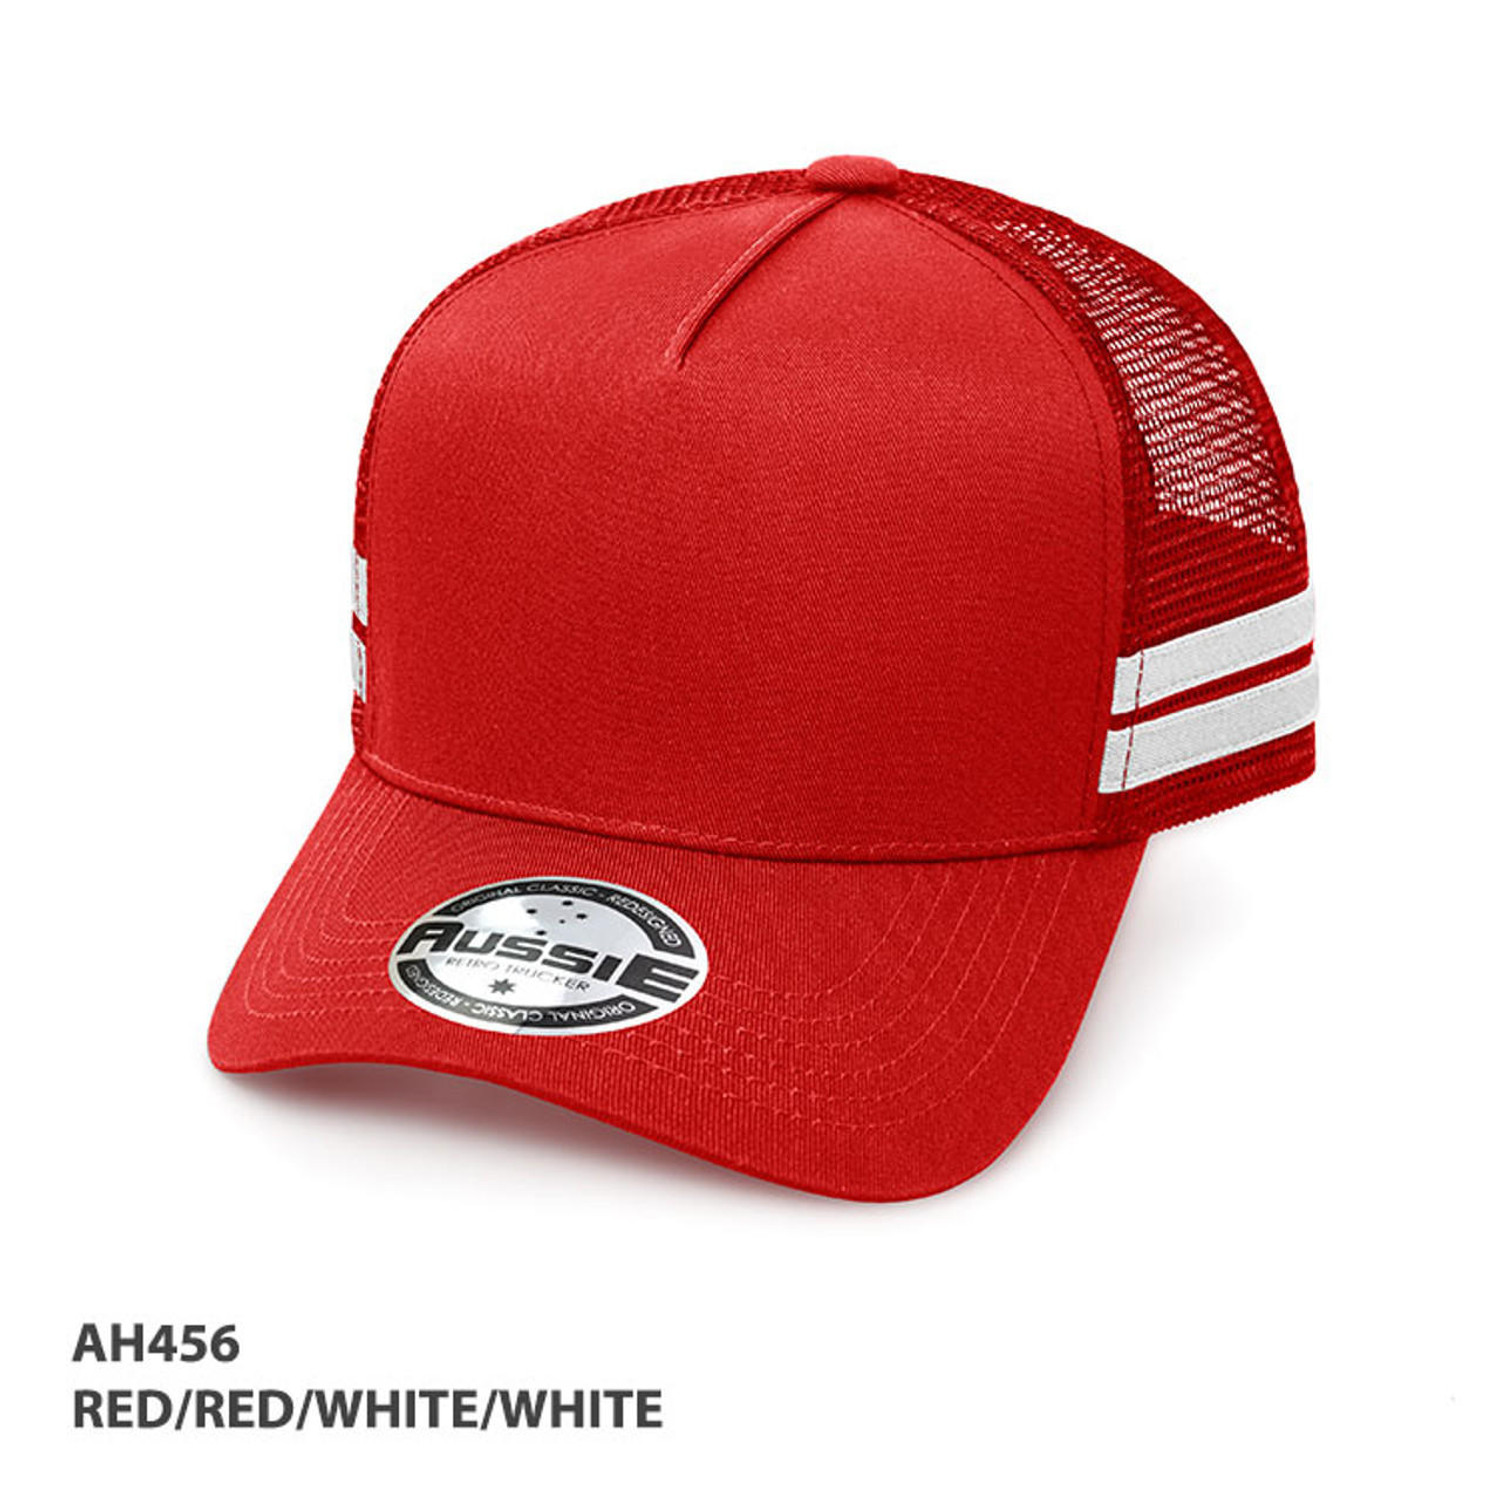  FREE EMBROIDERY - Trucker Cap in Red/White (Buy 20+) 